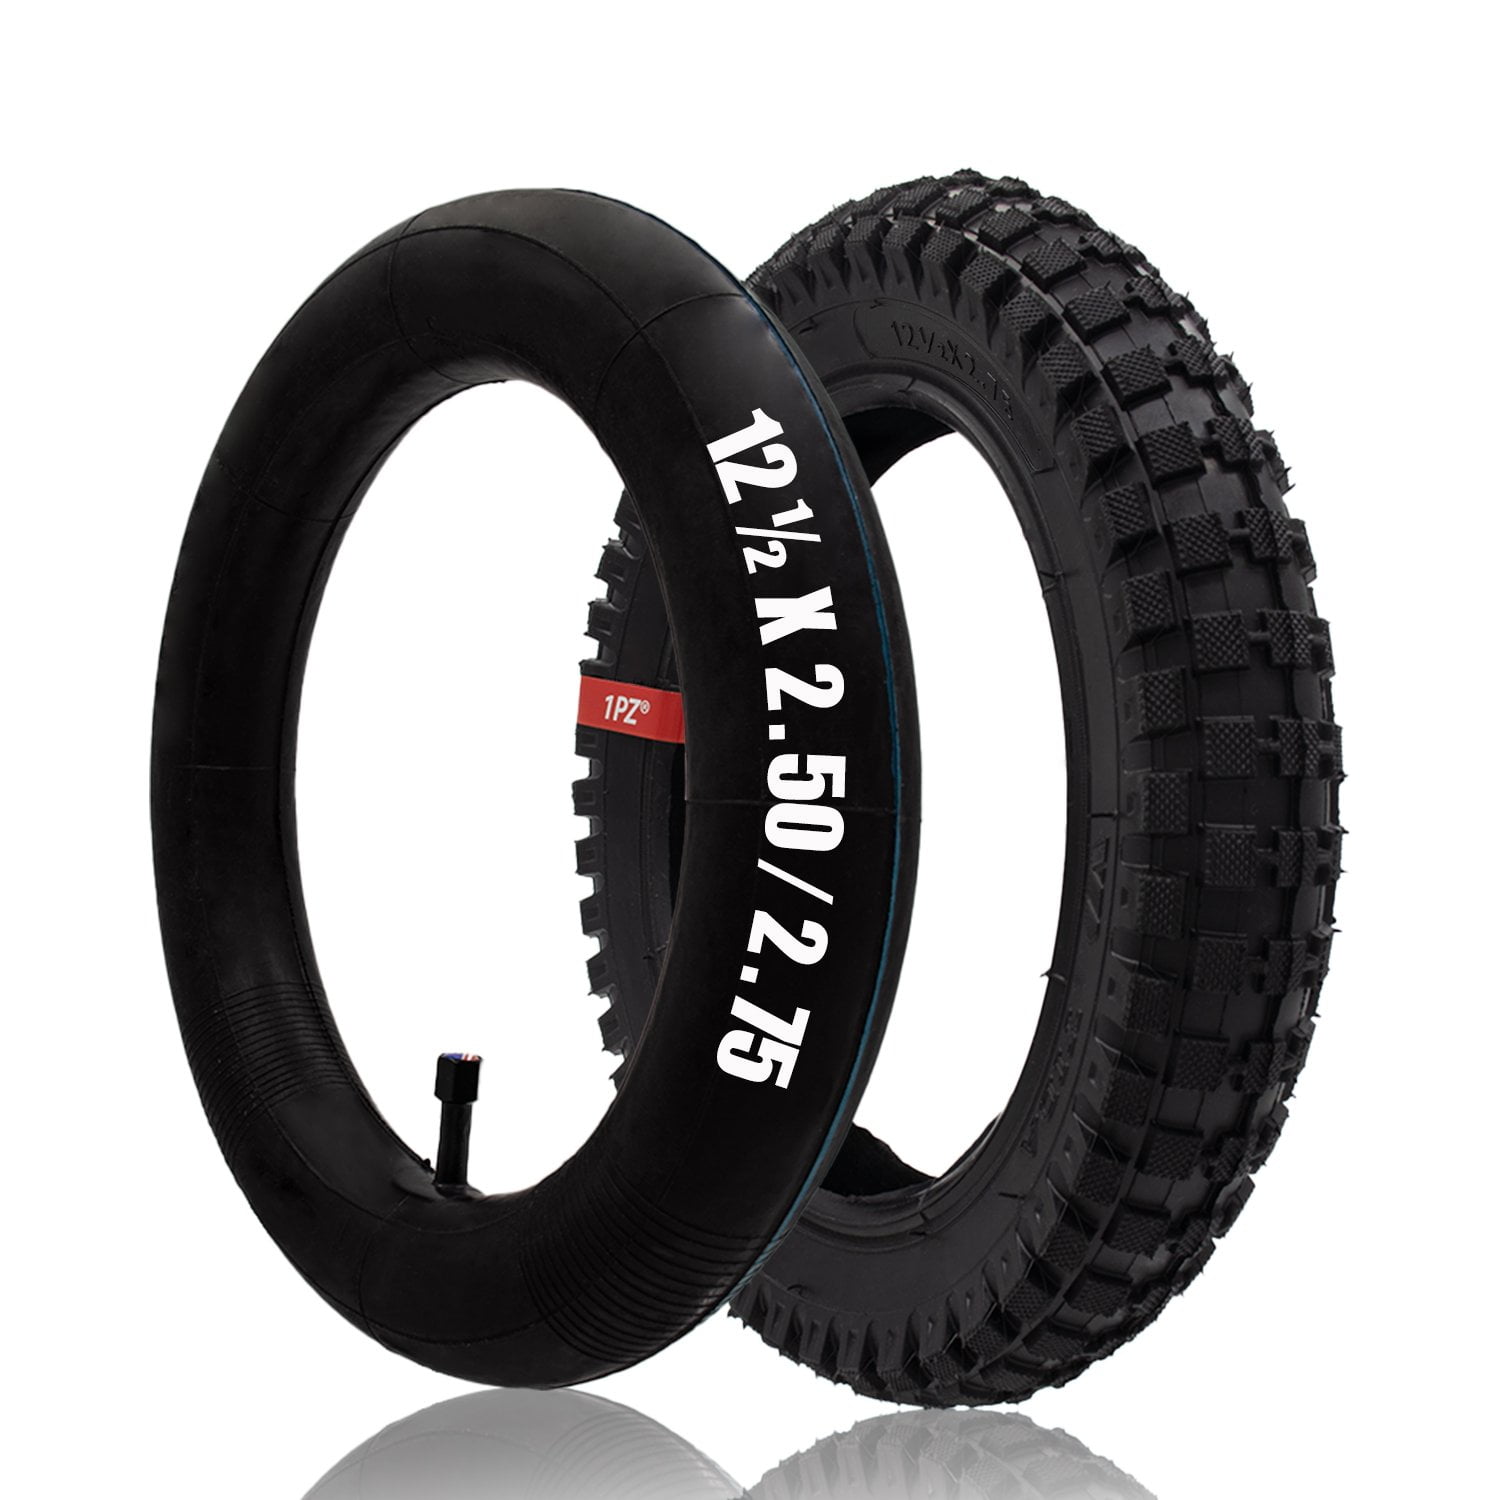 Inner Tube Replacement for Razor Dune Buggy Dirt Rocket MX350 MX400 TR13 Stem 12.5 x 2.75 Tire 2 Sets of 12 1/2 x 2.75